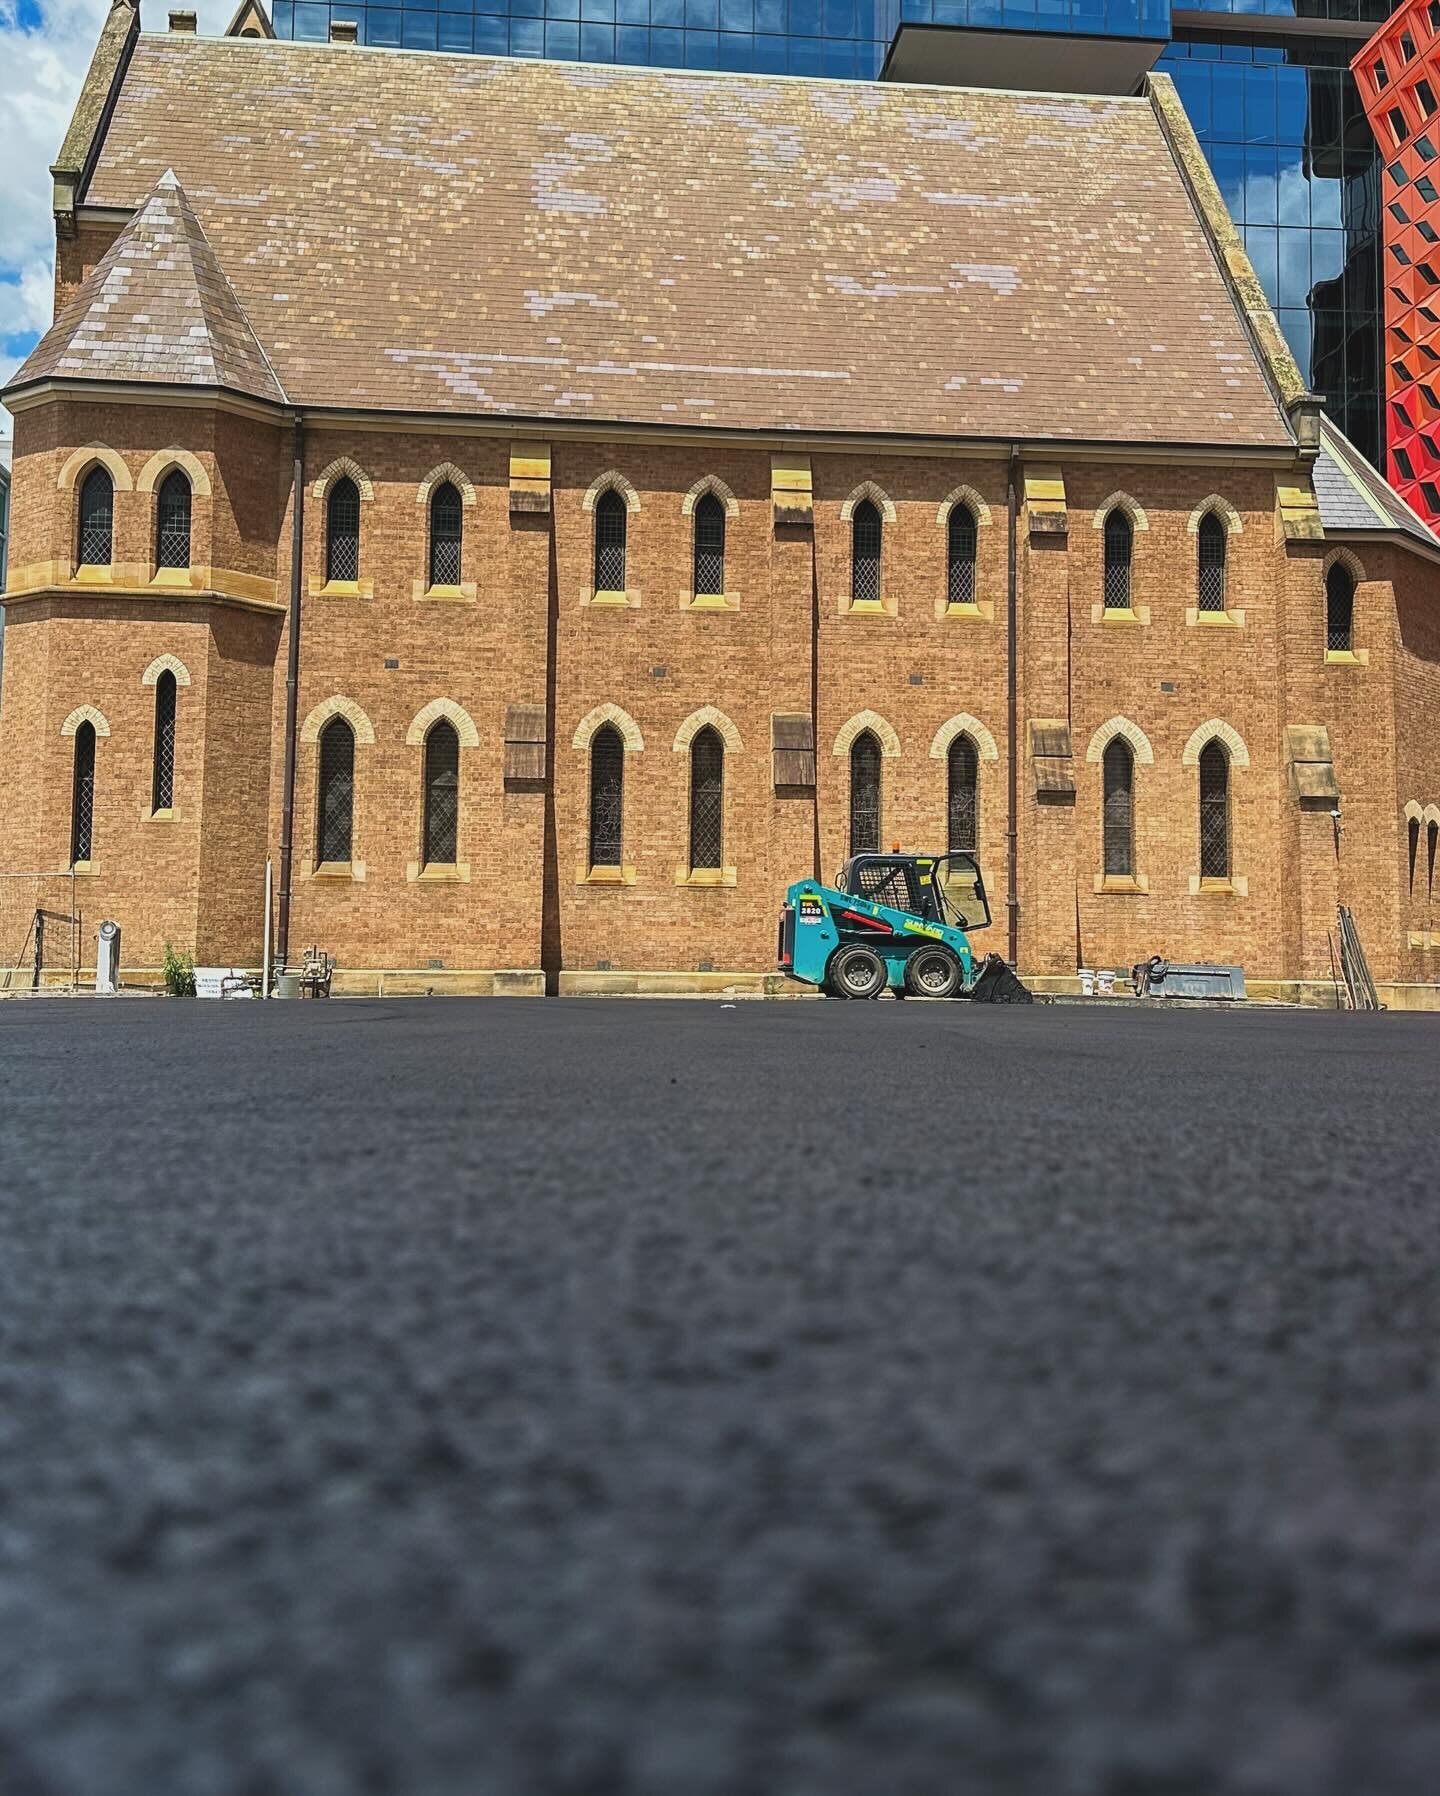 Clear the path, my friends, for the magnificent church of Parramatta!

Oh boy, let me tell you, this was no ordinary transformation. Hats off to all the talented individuals involved in this incredible endeavor. Bravo!